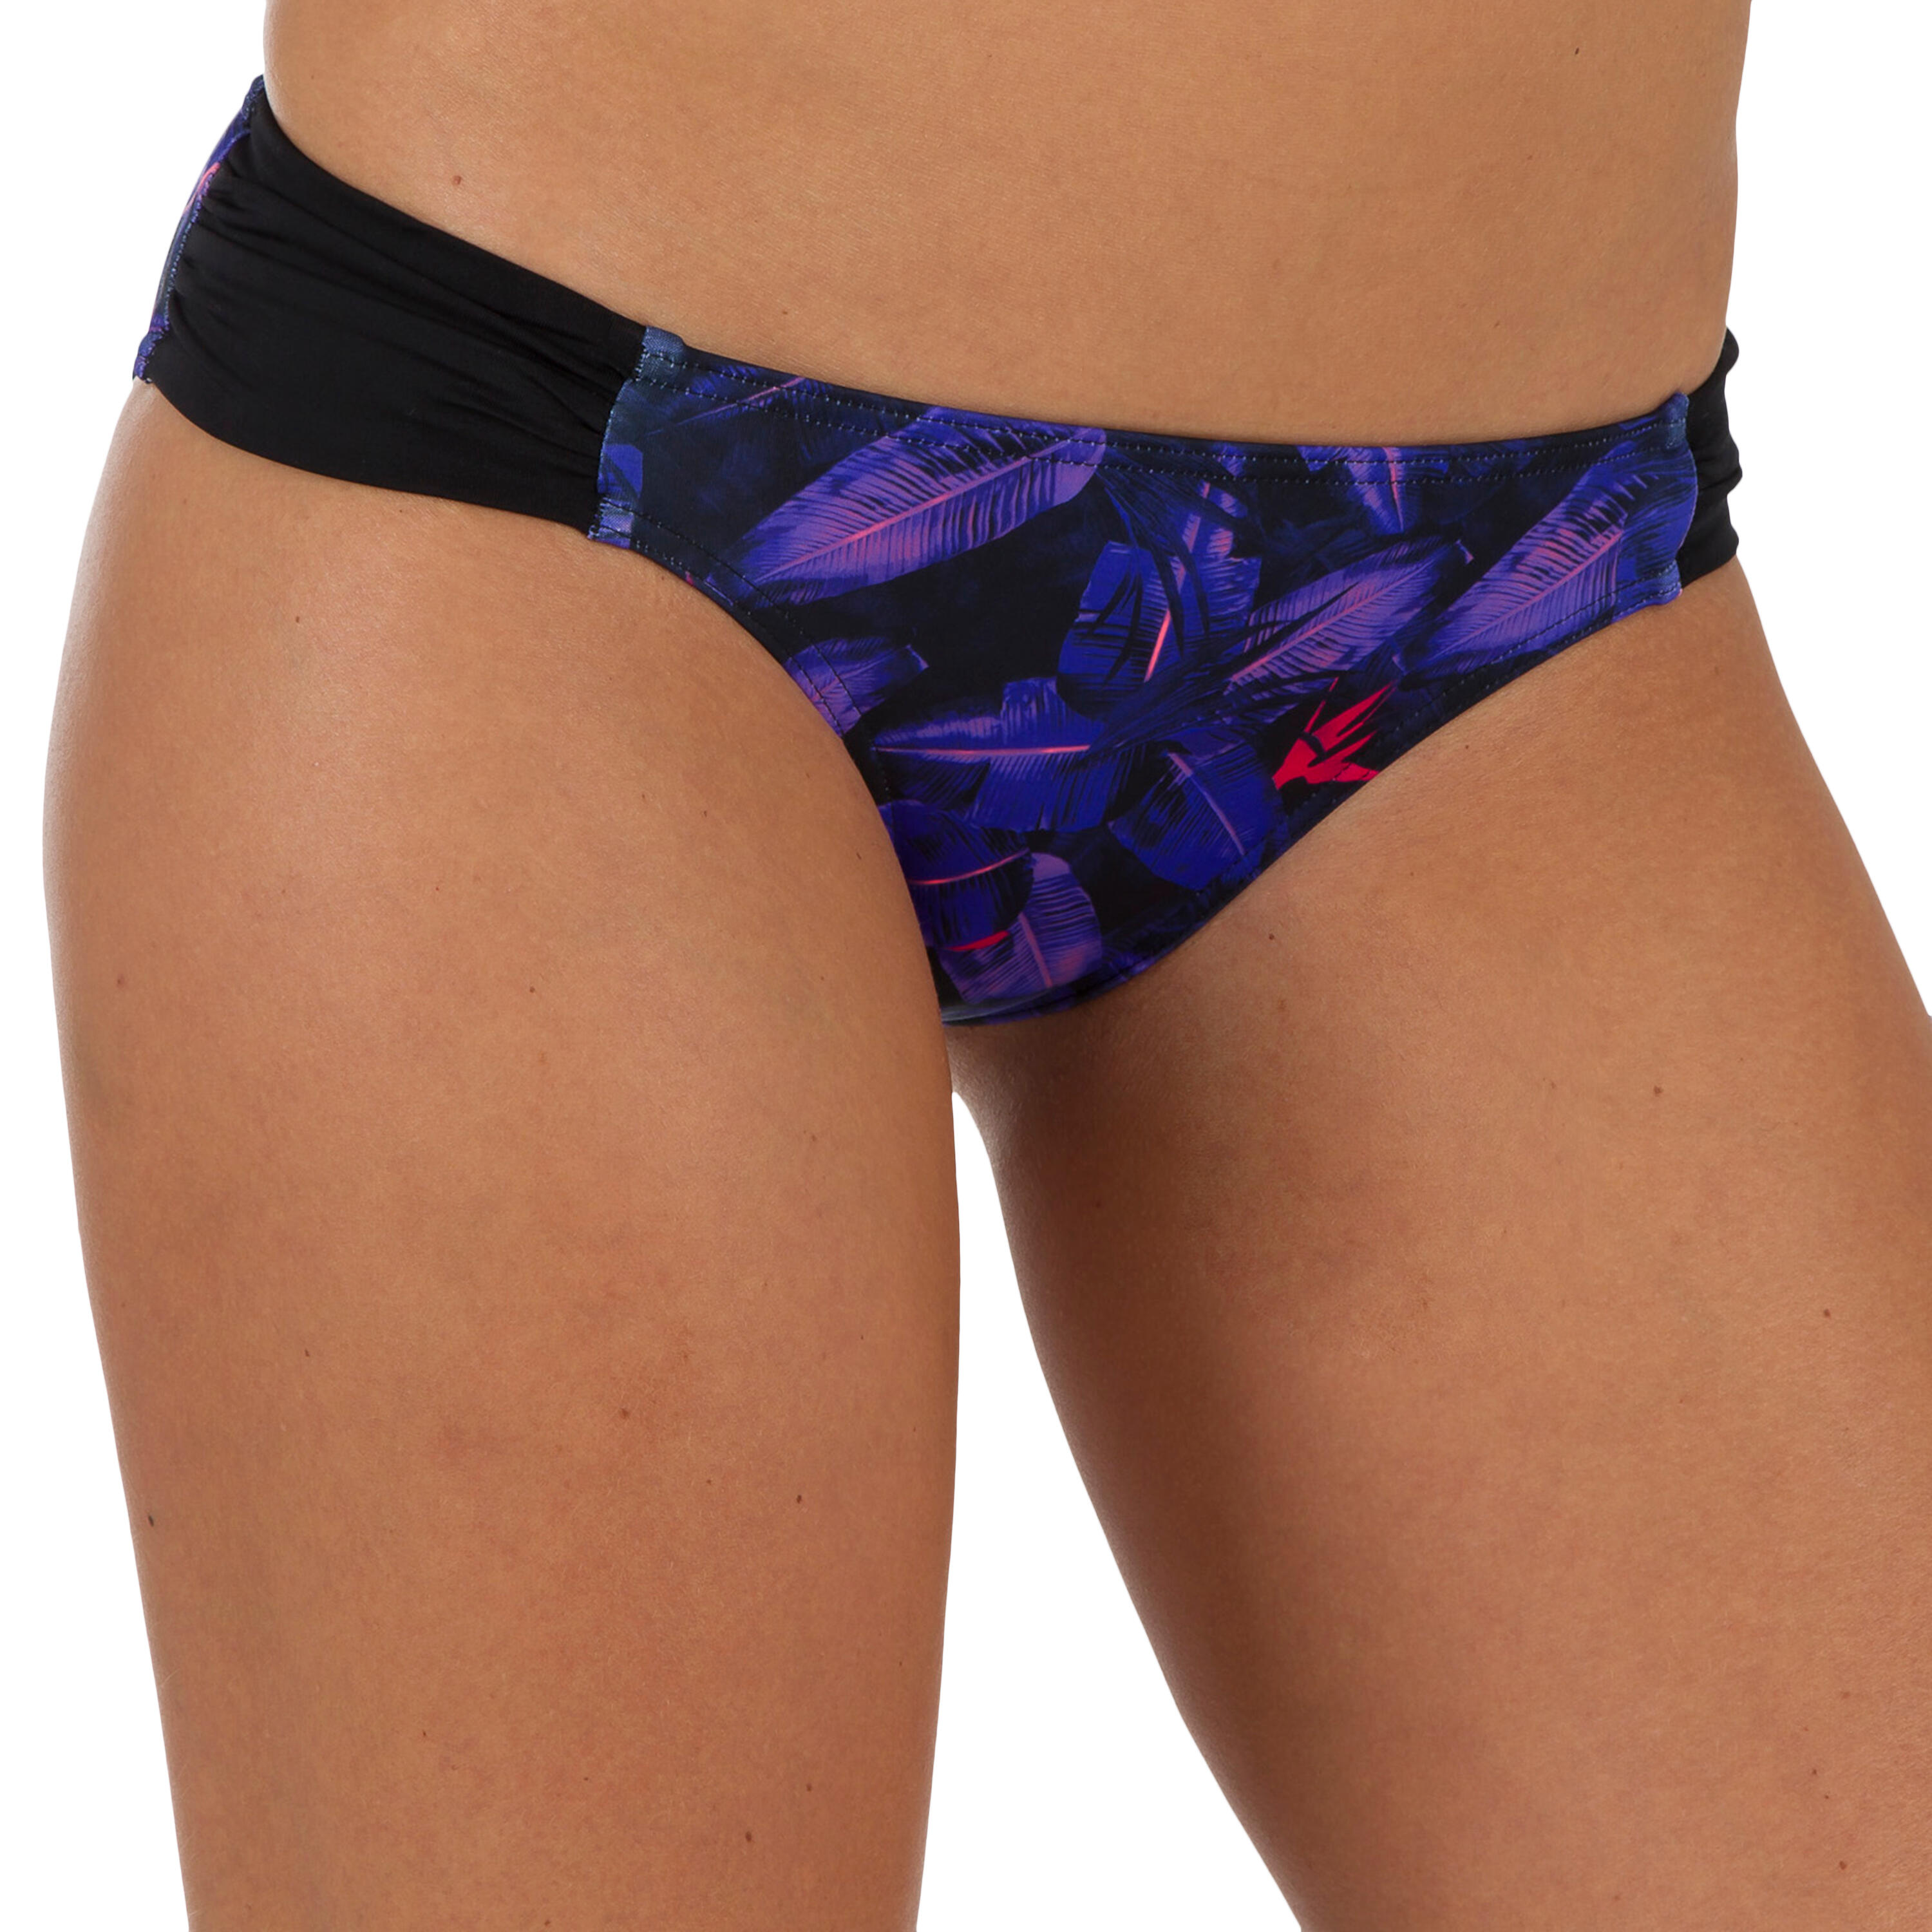 OLAIAN Niki Women's Surfing Swimsuit Bottoms with Gathering at the Sides - Psycho